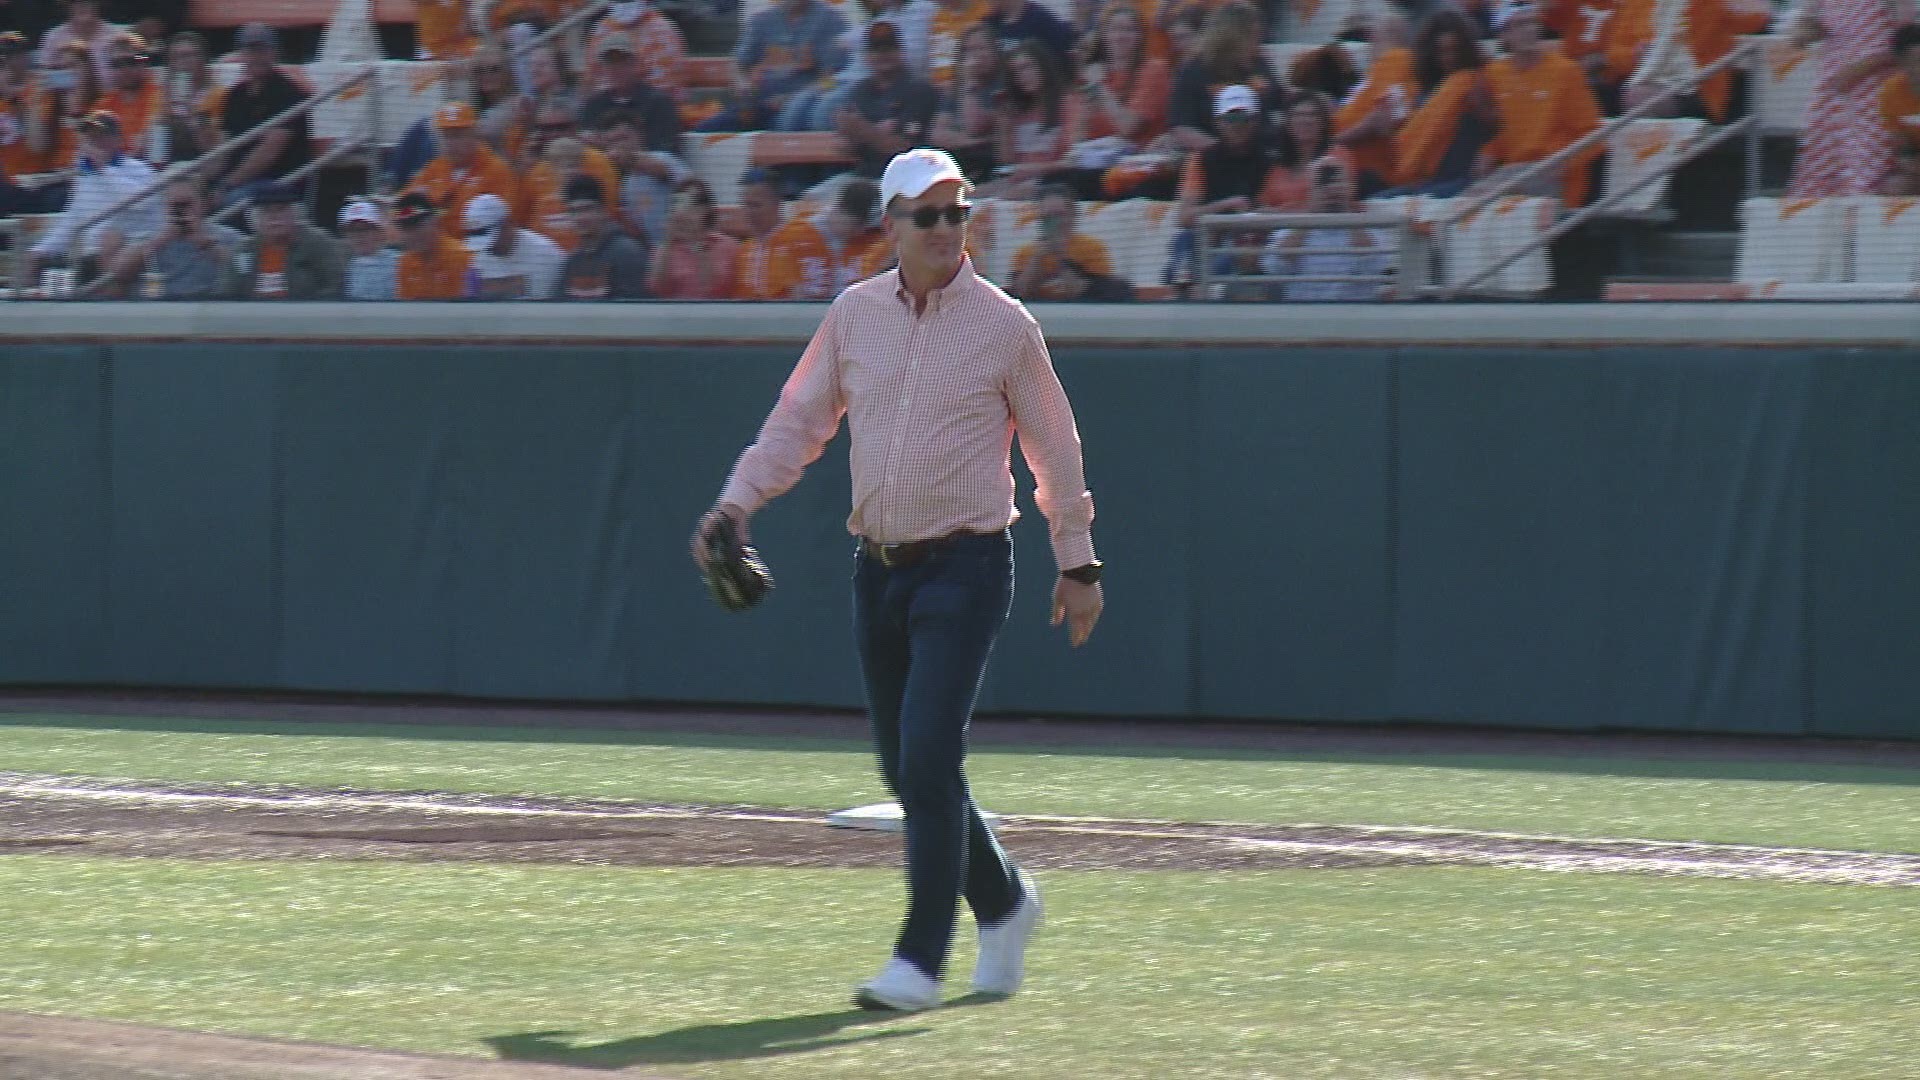 Peyton Manning brought the heat, throwing out the first pitch at his alma mater's baseball game Friday.